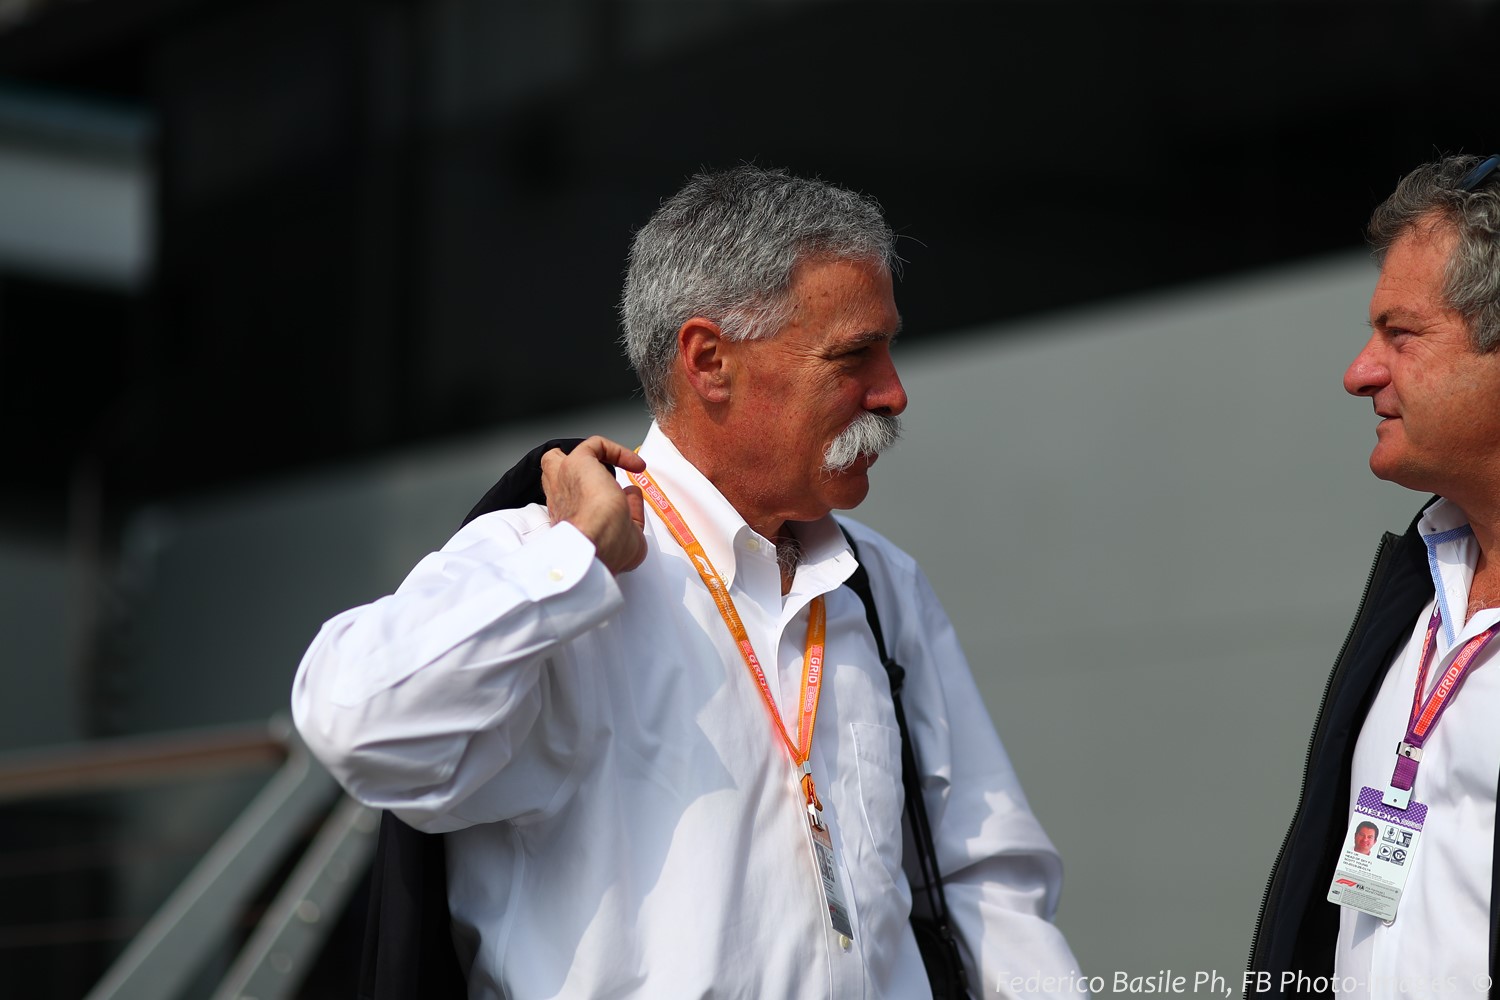 F1 boss Chase Carey in Budapest making case for 22, soon to be 24-race calendar